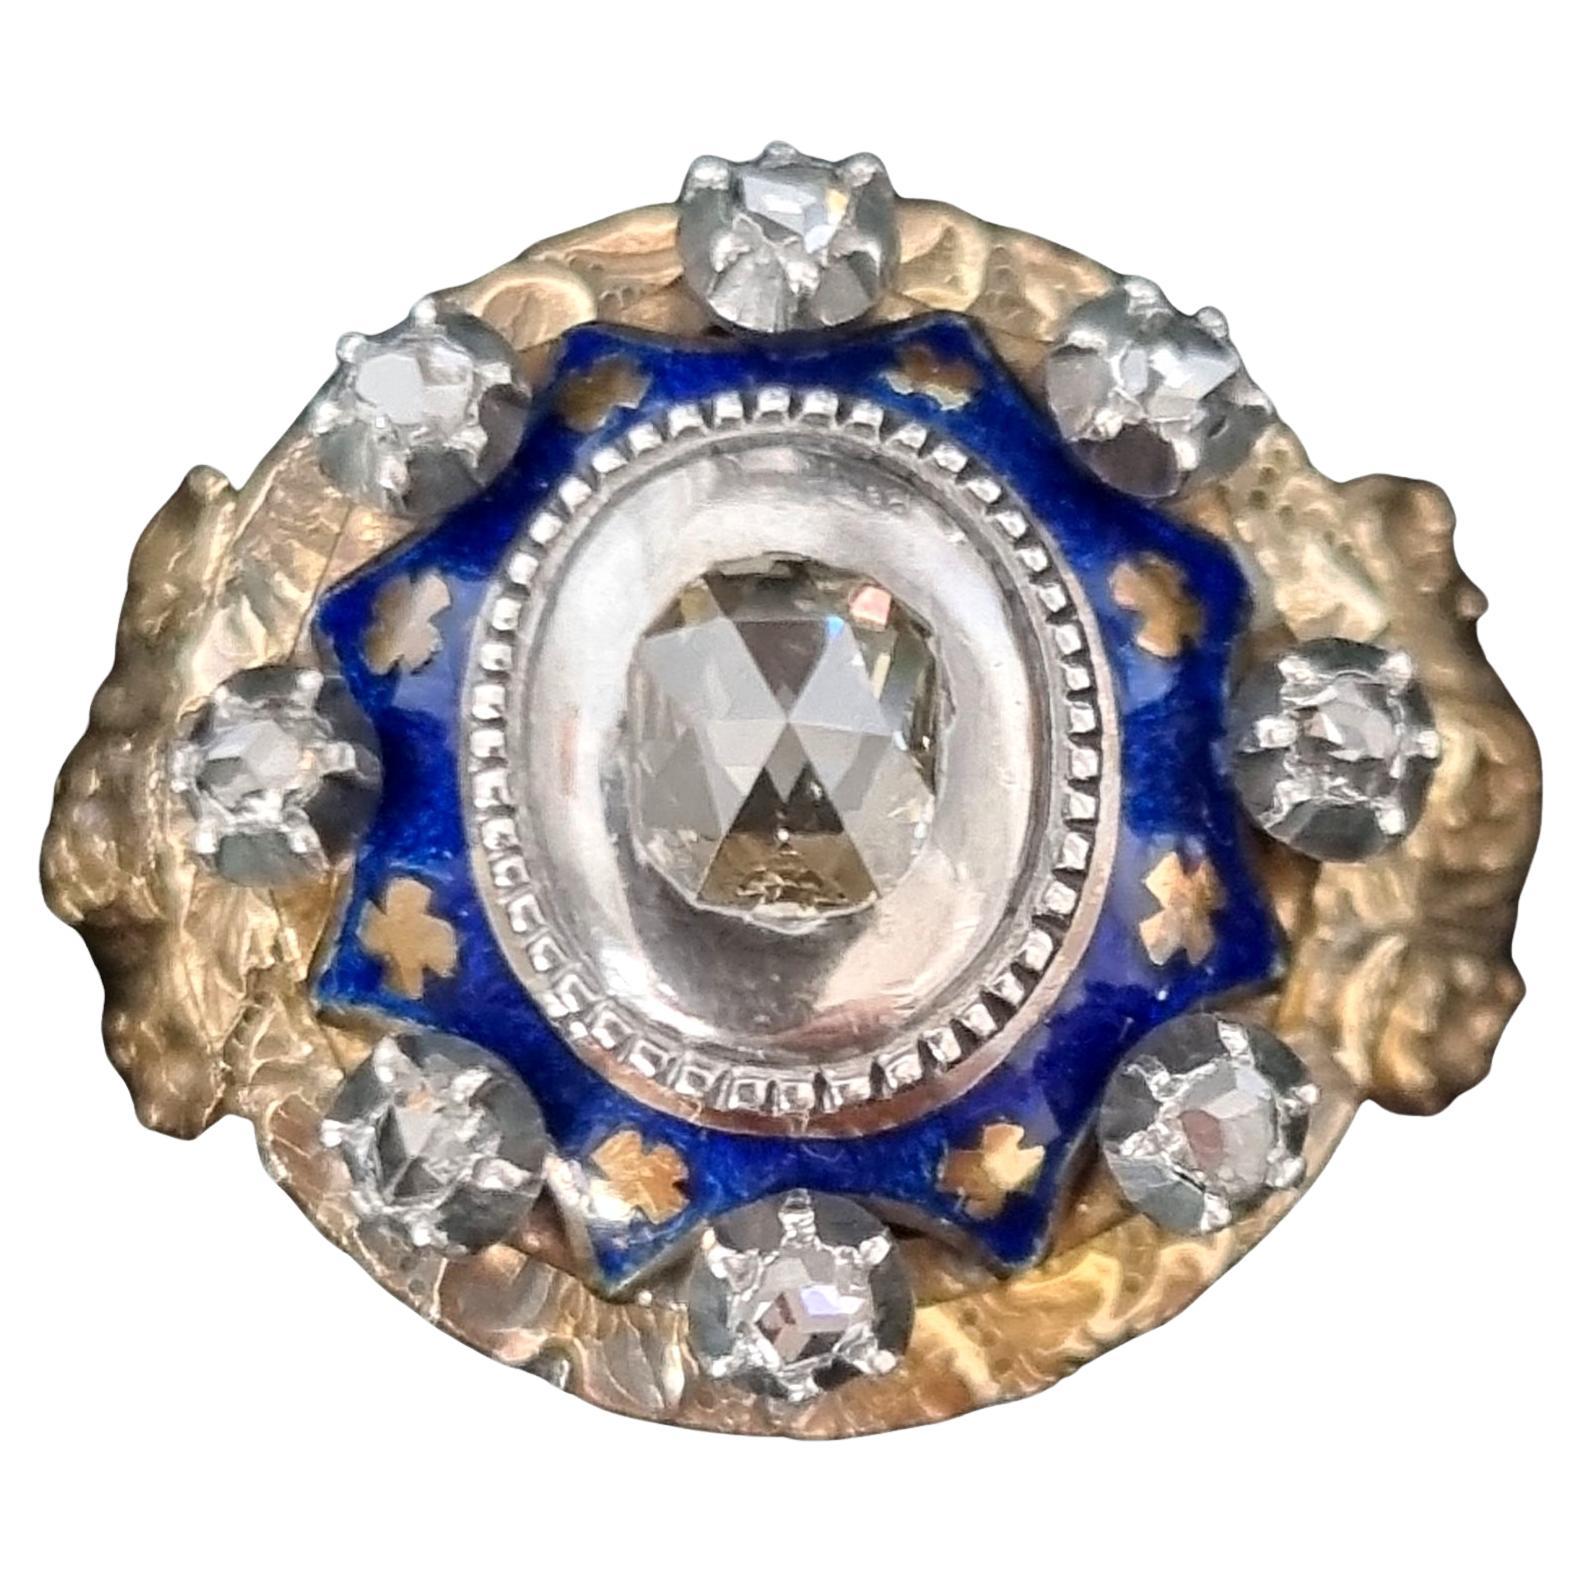 Antique late Baroque Diamond and Blue Enamel Eight pointed Star Ring (Rococo/ Georgian period)
A small portion of History,  more  250 years old!!! (Iberian, Catalan not hallmarked).
Mounted in silver over 18K Gold. handmade and weighing 12.7